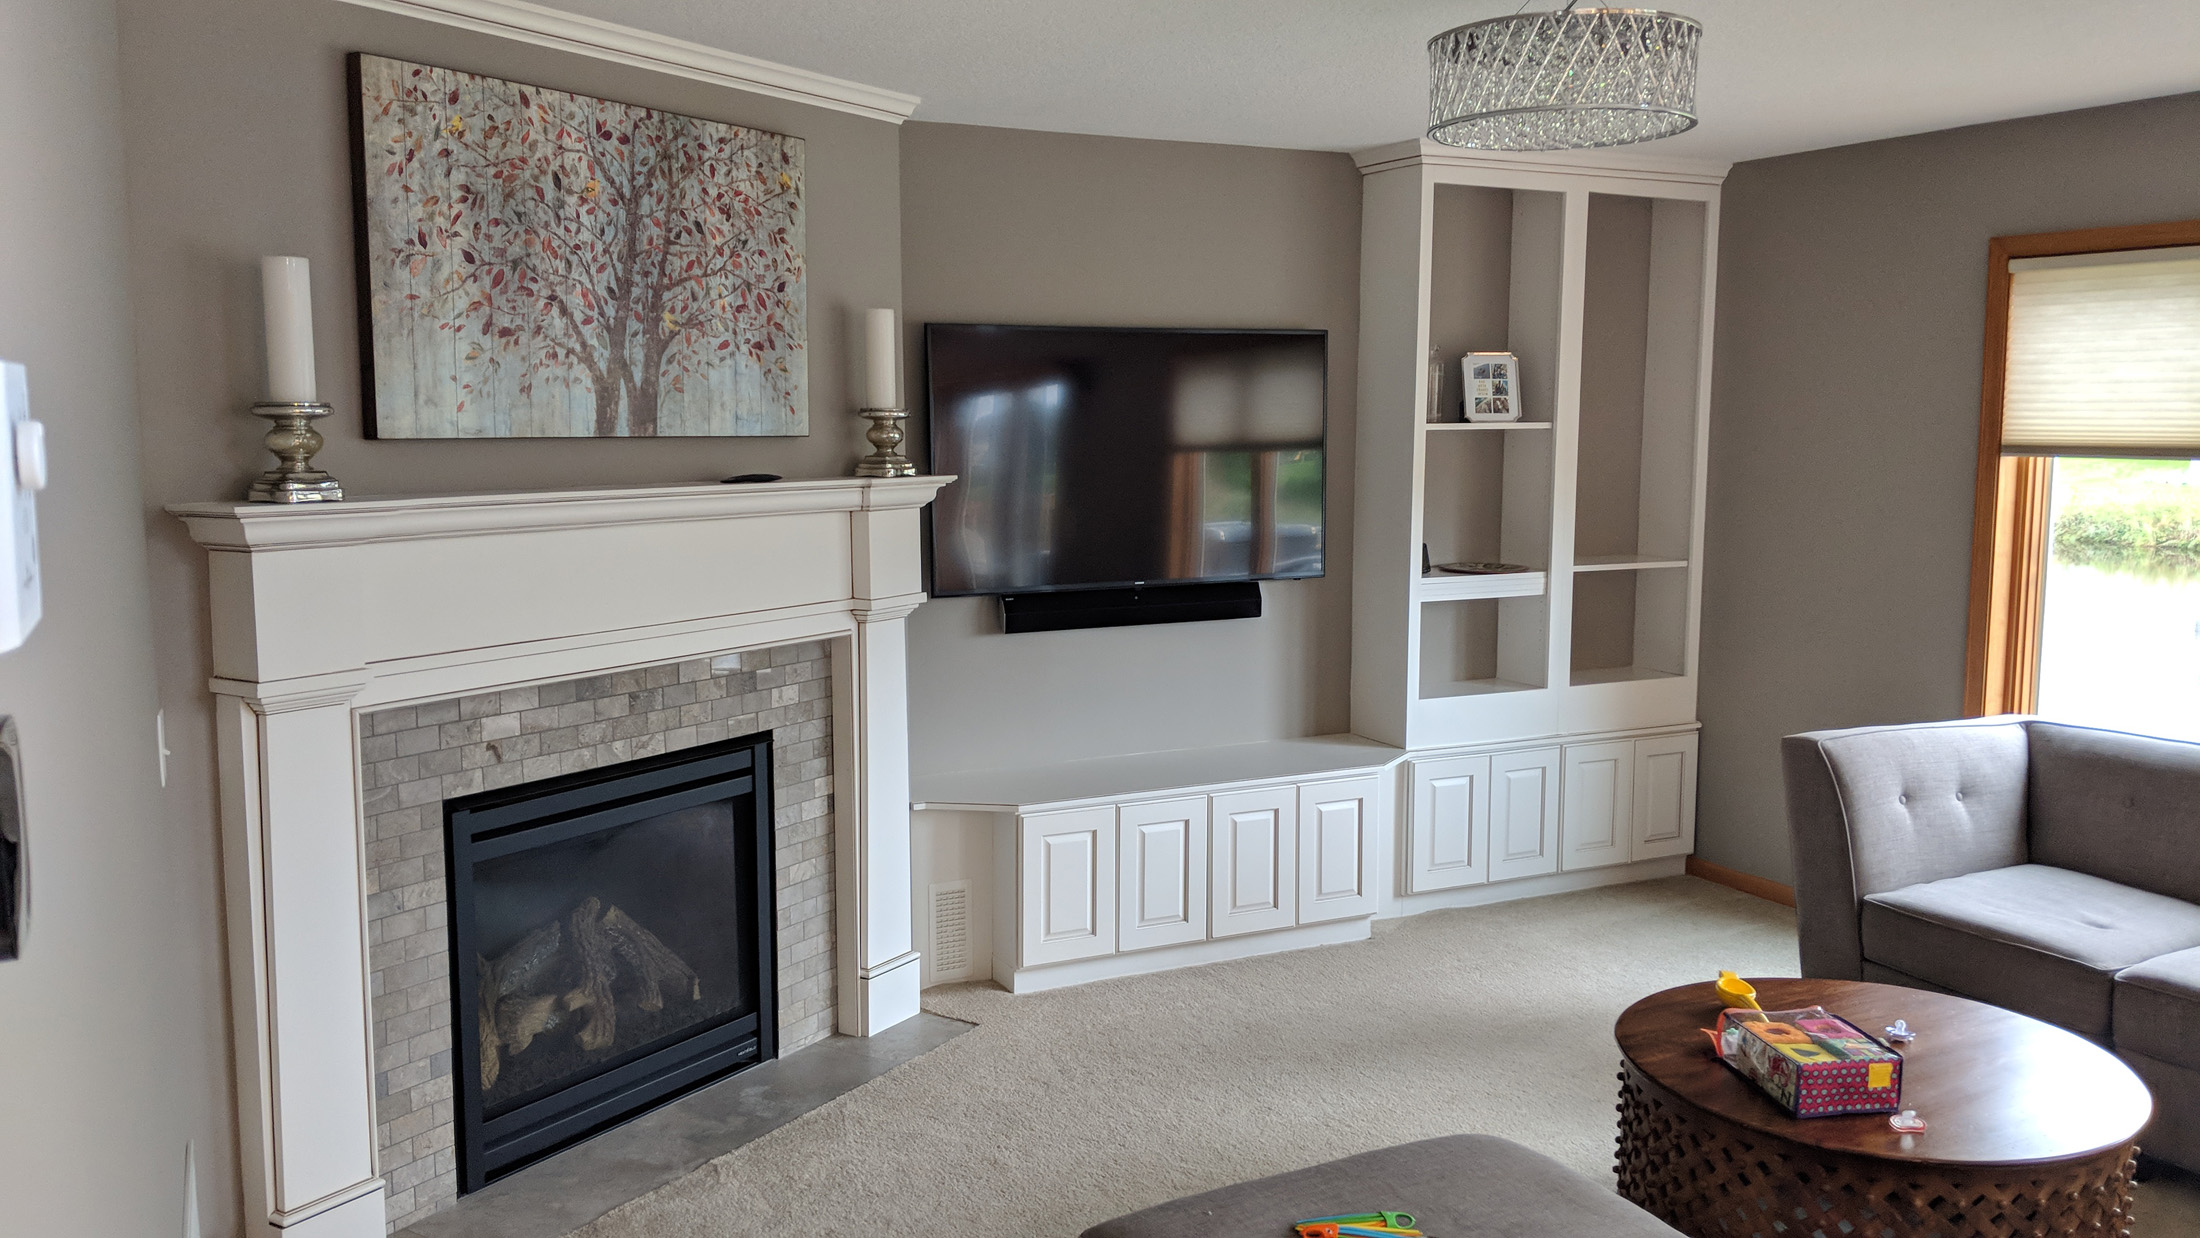 Angled fireplace with surround